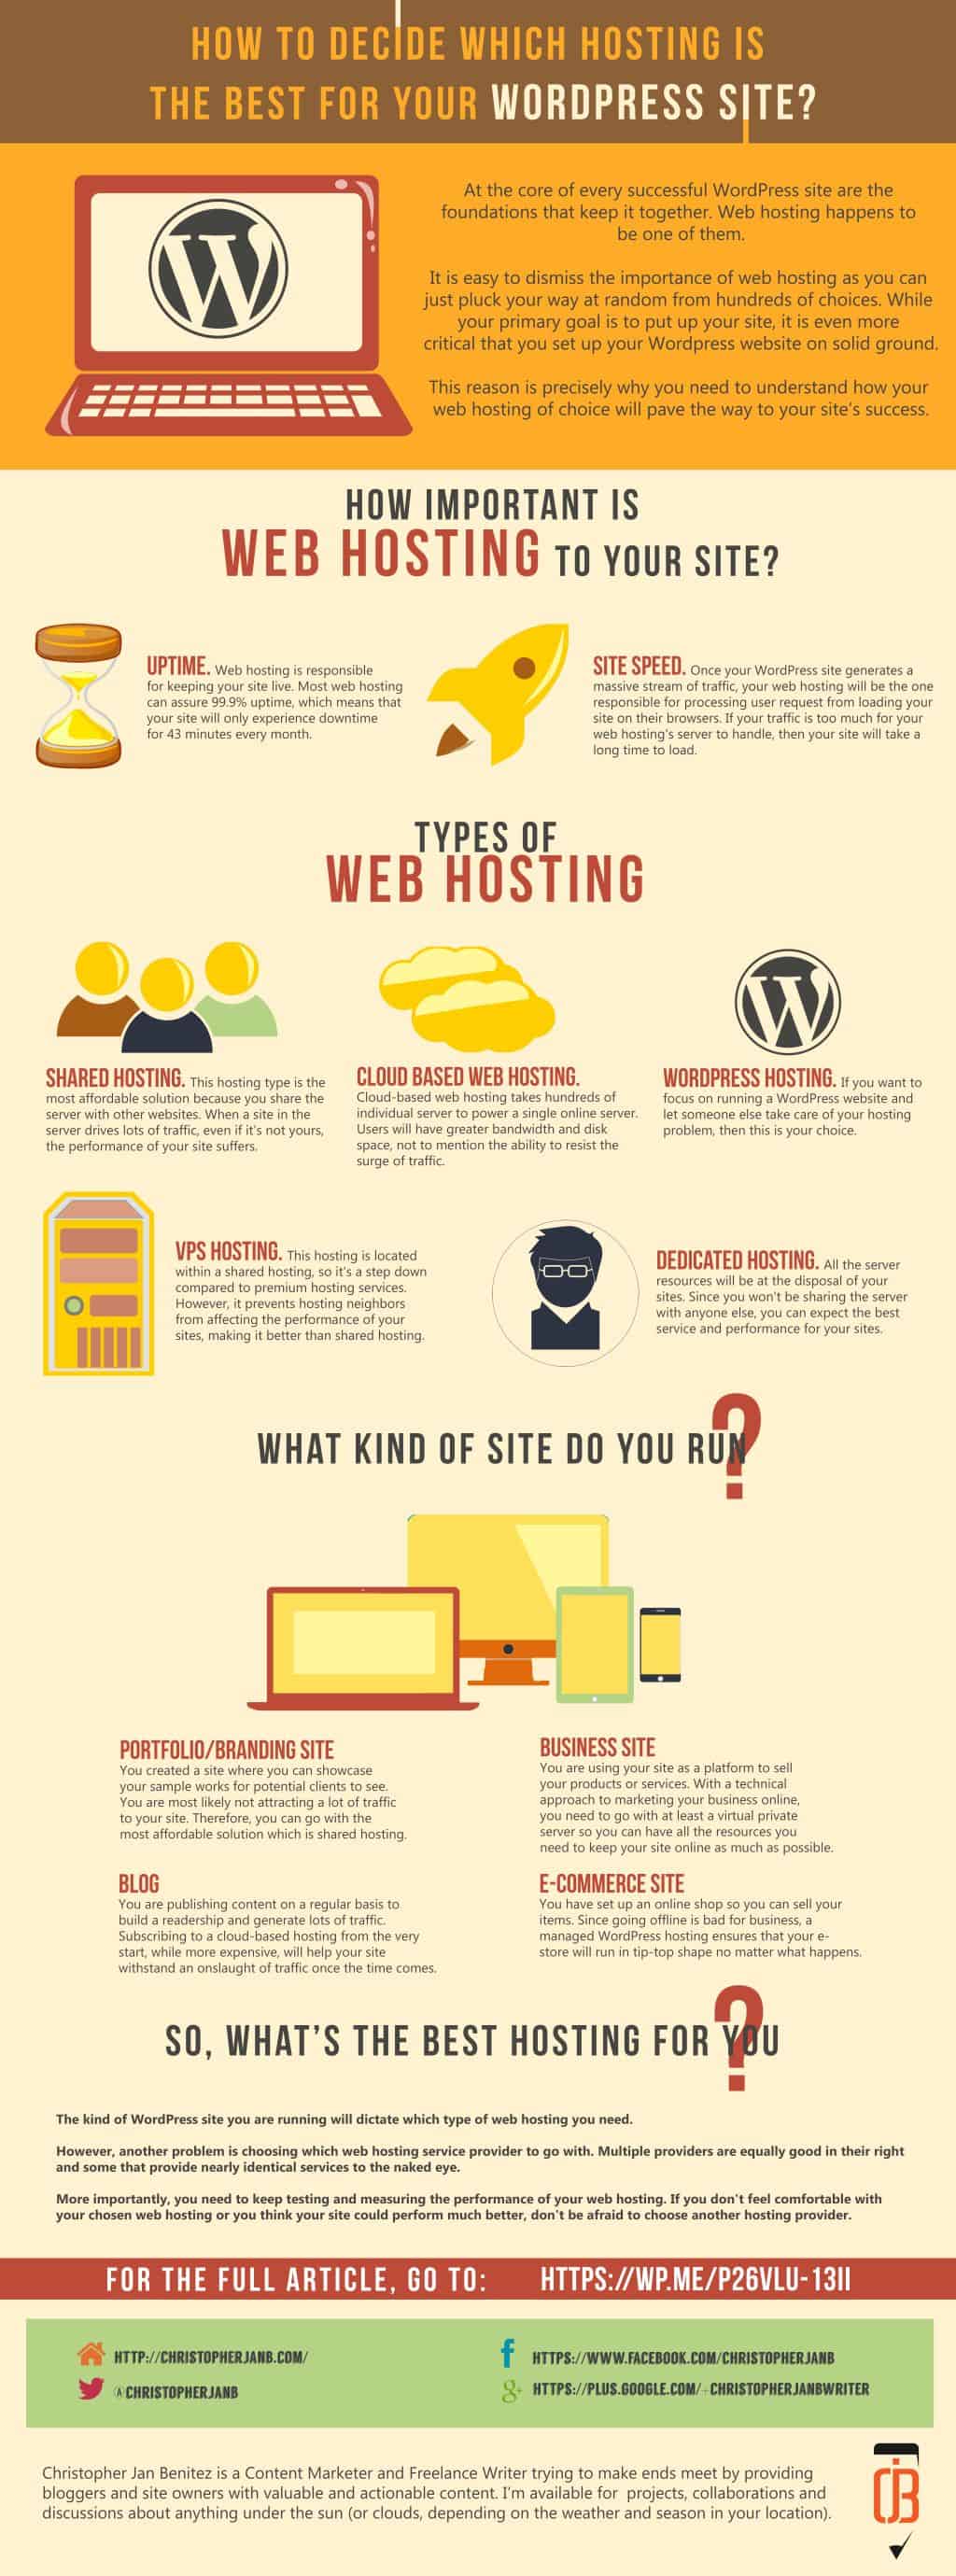 How to Decide Which Hosting is the Best for Your WordPress Site